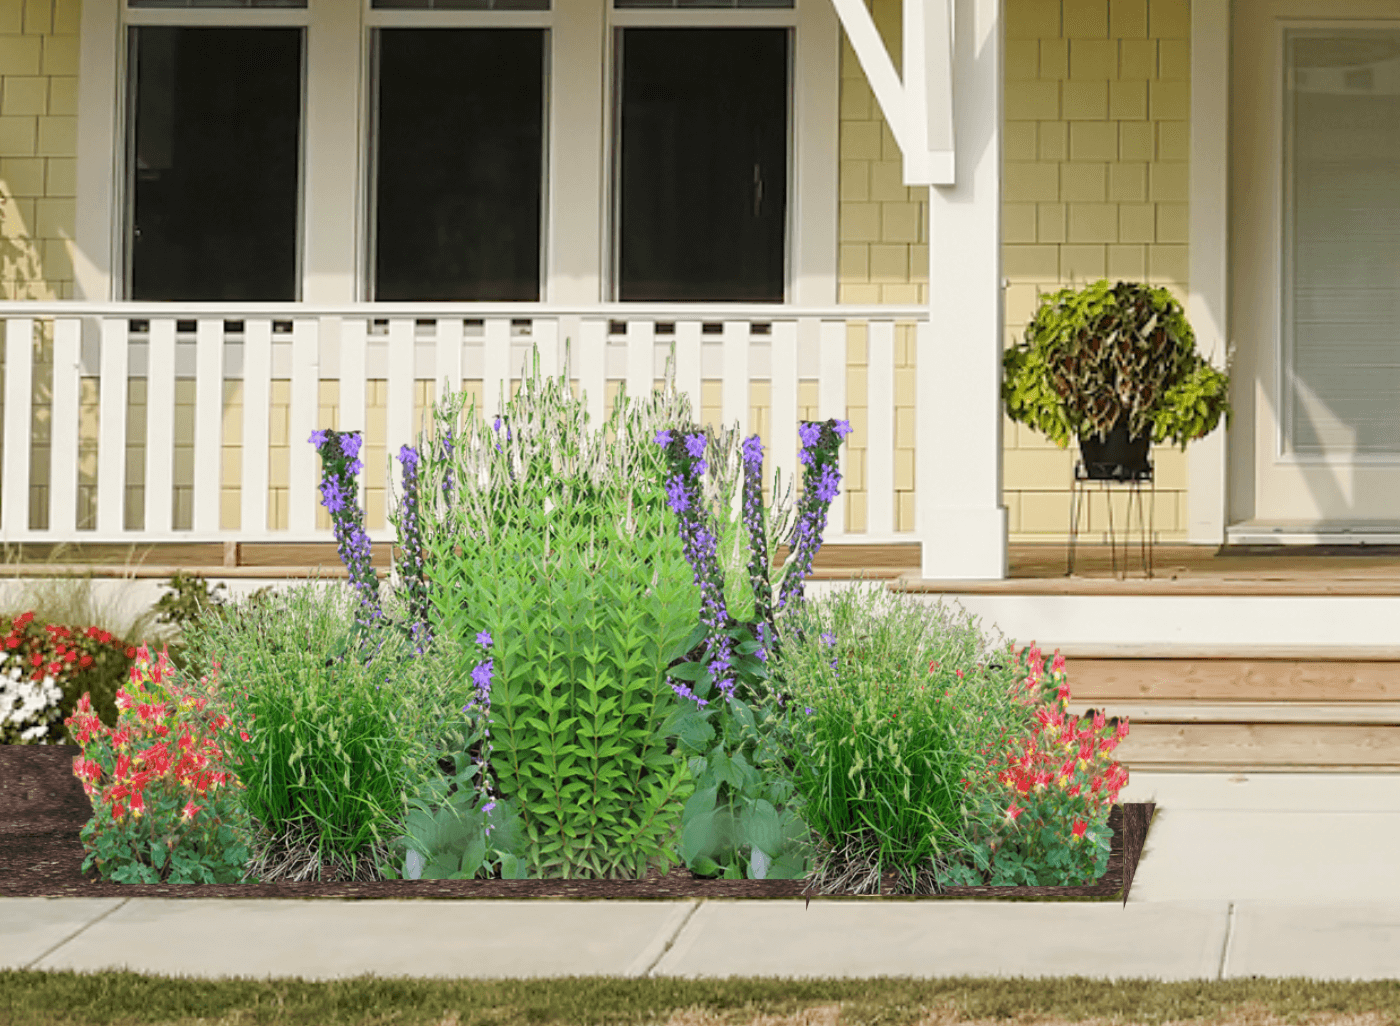 A garden of red and blue native flowers and grasses in front of a yellow house